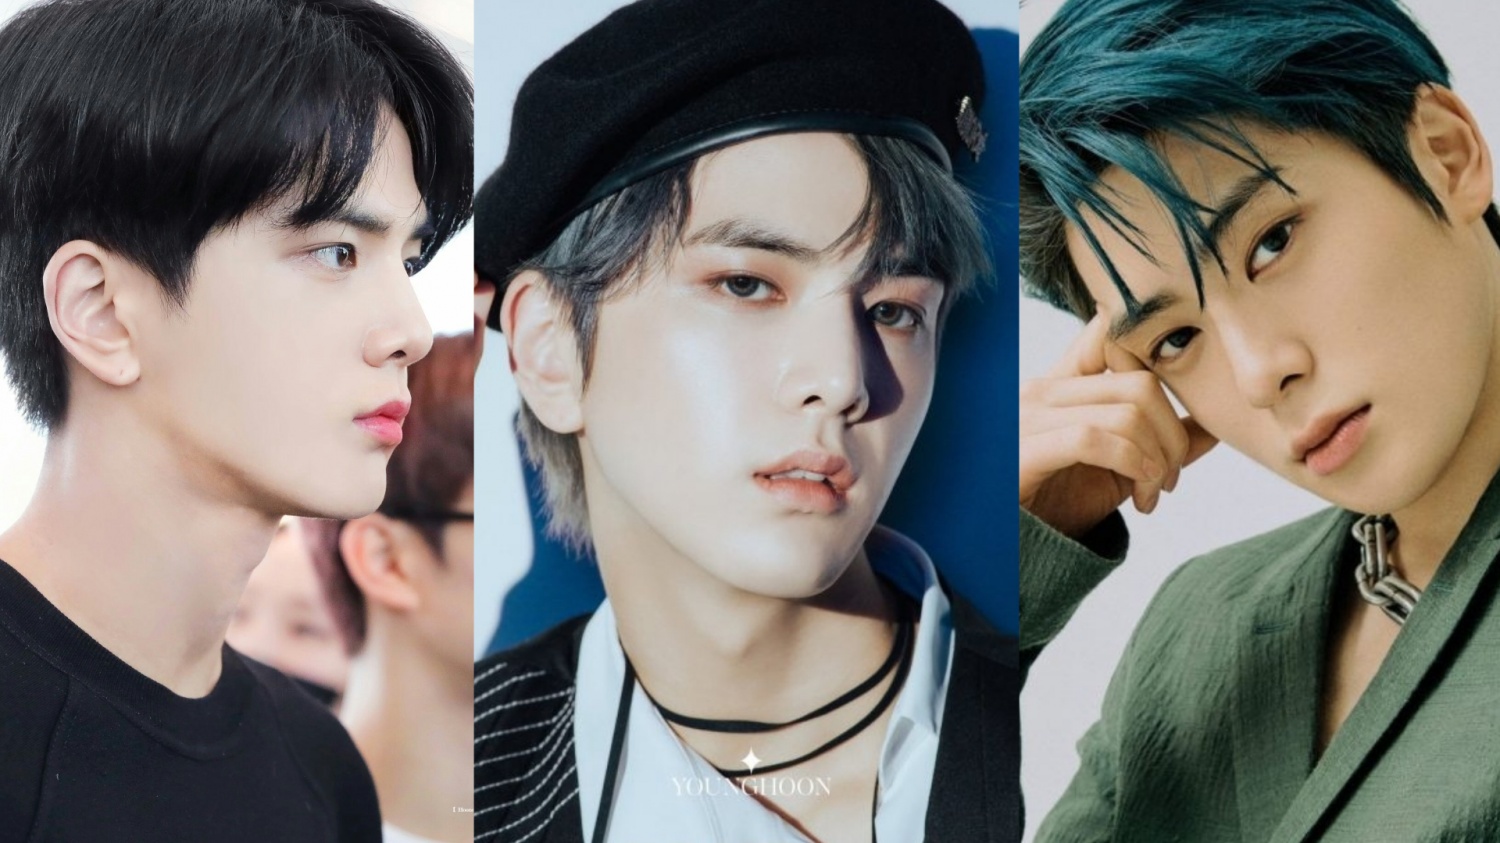 Male Idols with The Leading Visuals from Third Generation